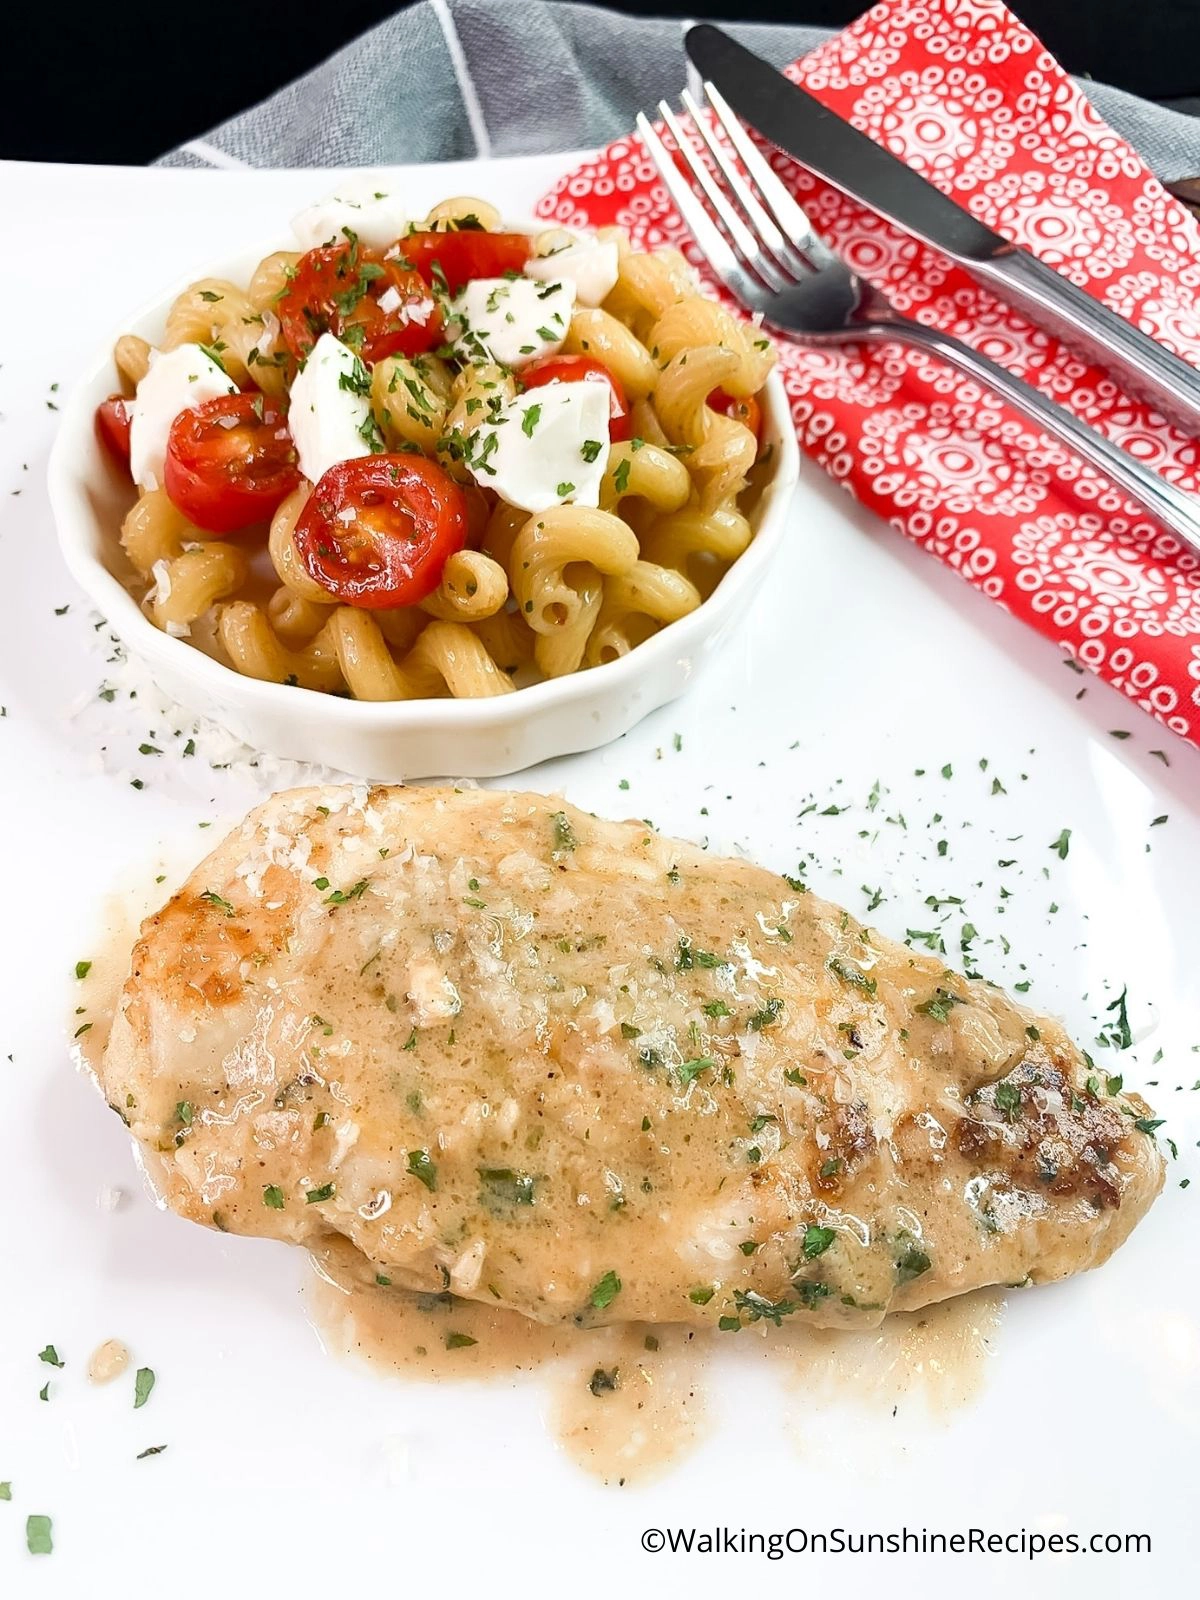 Sauteed chicken cutlets on white plate with pasta and tomatoes in bowl.